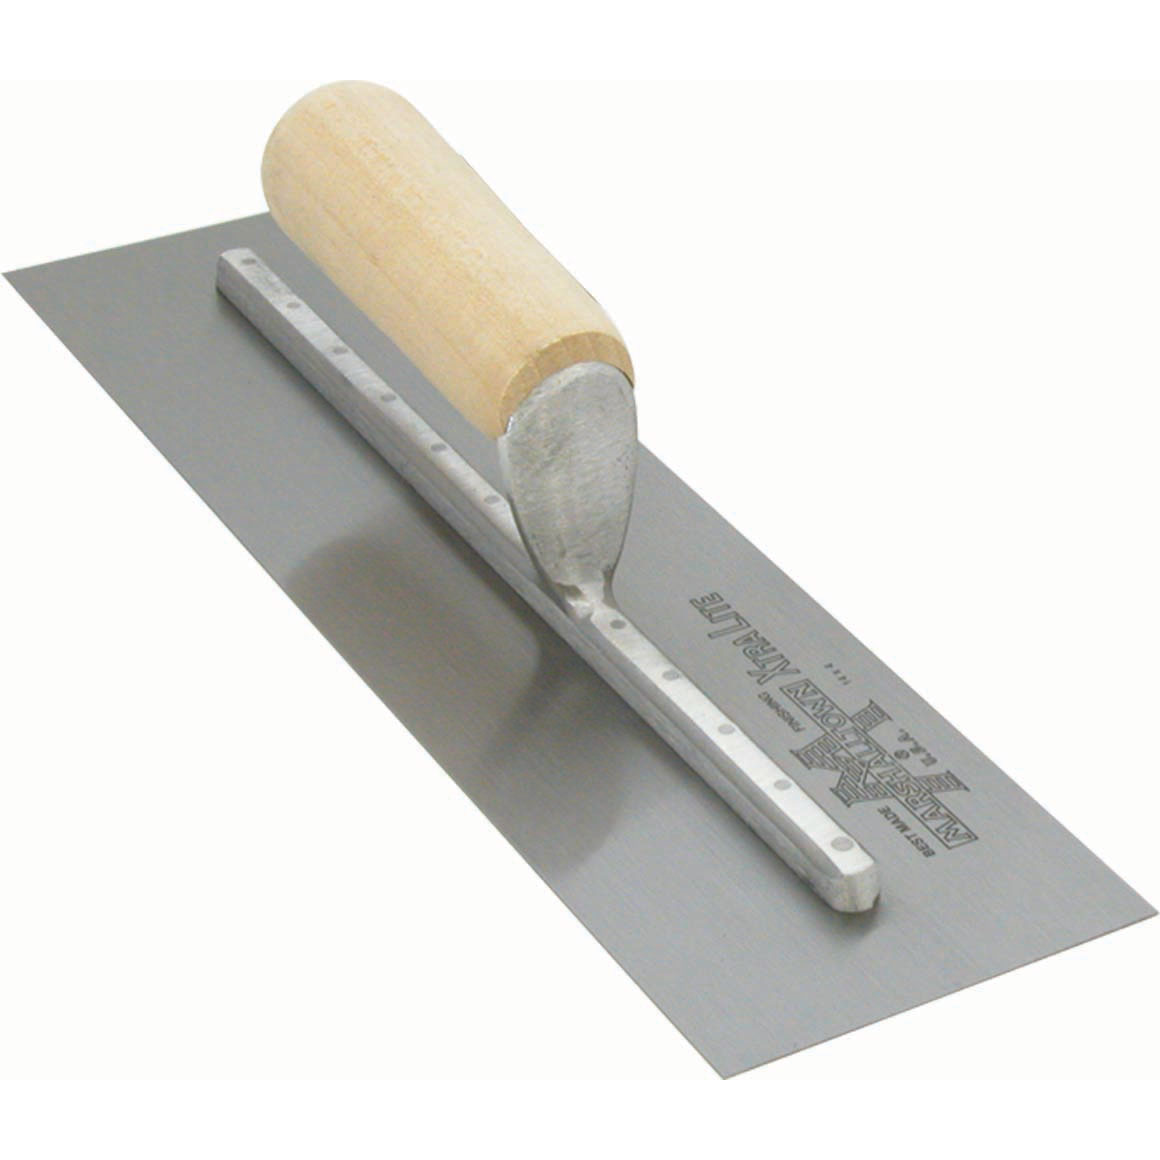 Marshalltown MX62 12in x 4in Finishing Trowel with Straight Wood Handle MX62